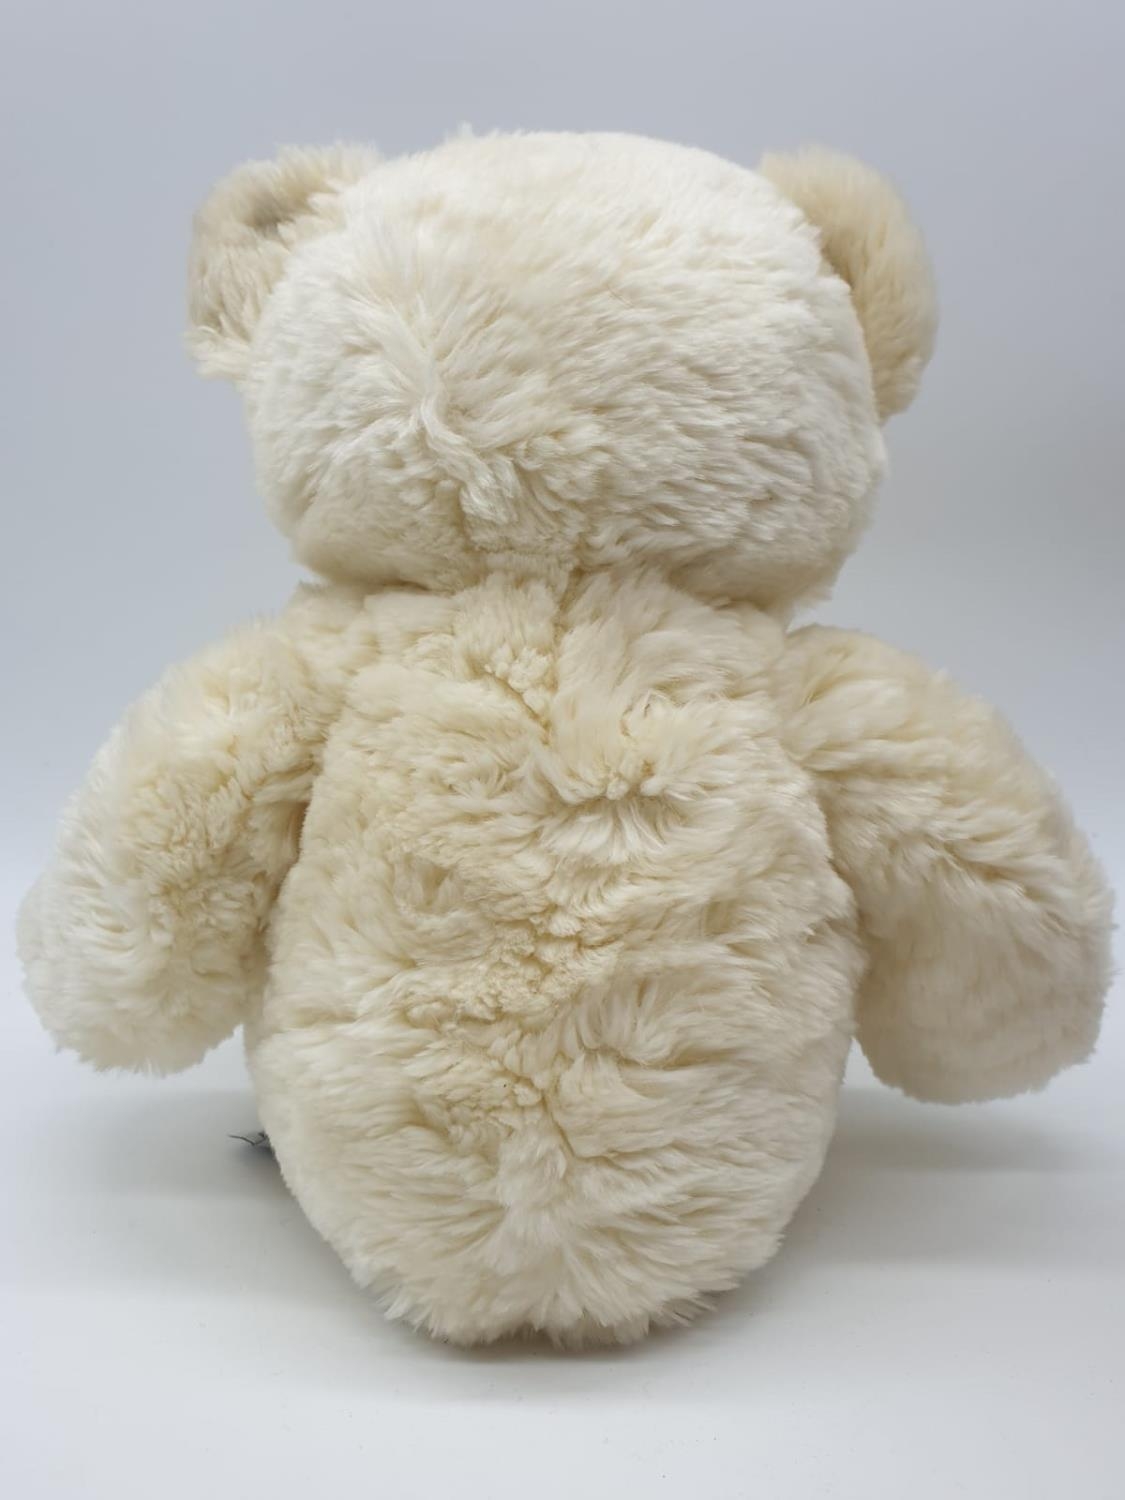 Two Harrods teddy bears, one being "My first Harrods teddy" and a traditional Harrods teddy. Approx. - Image 8 of 10